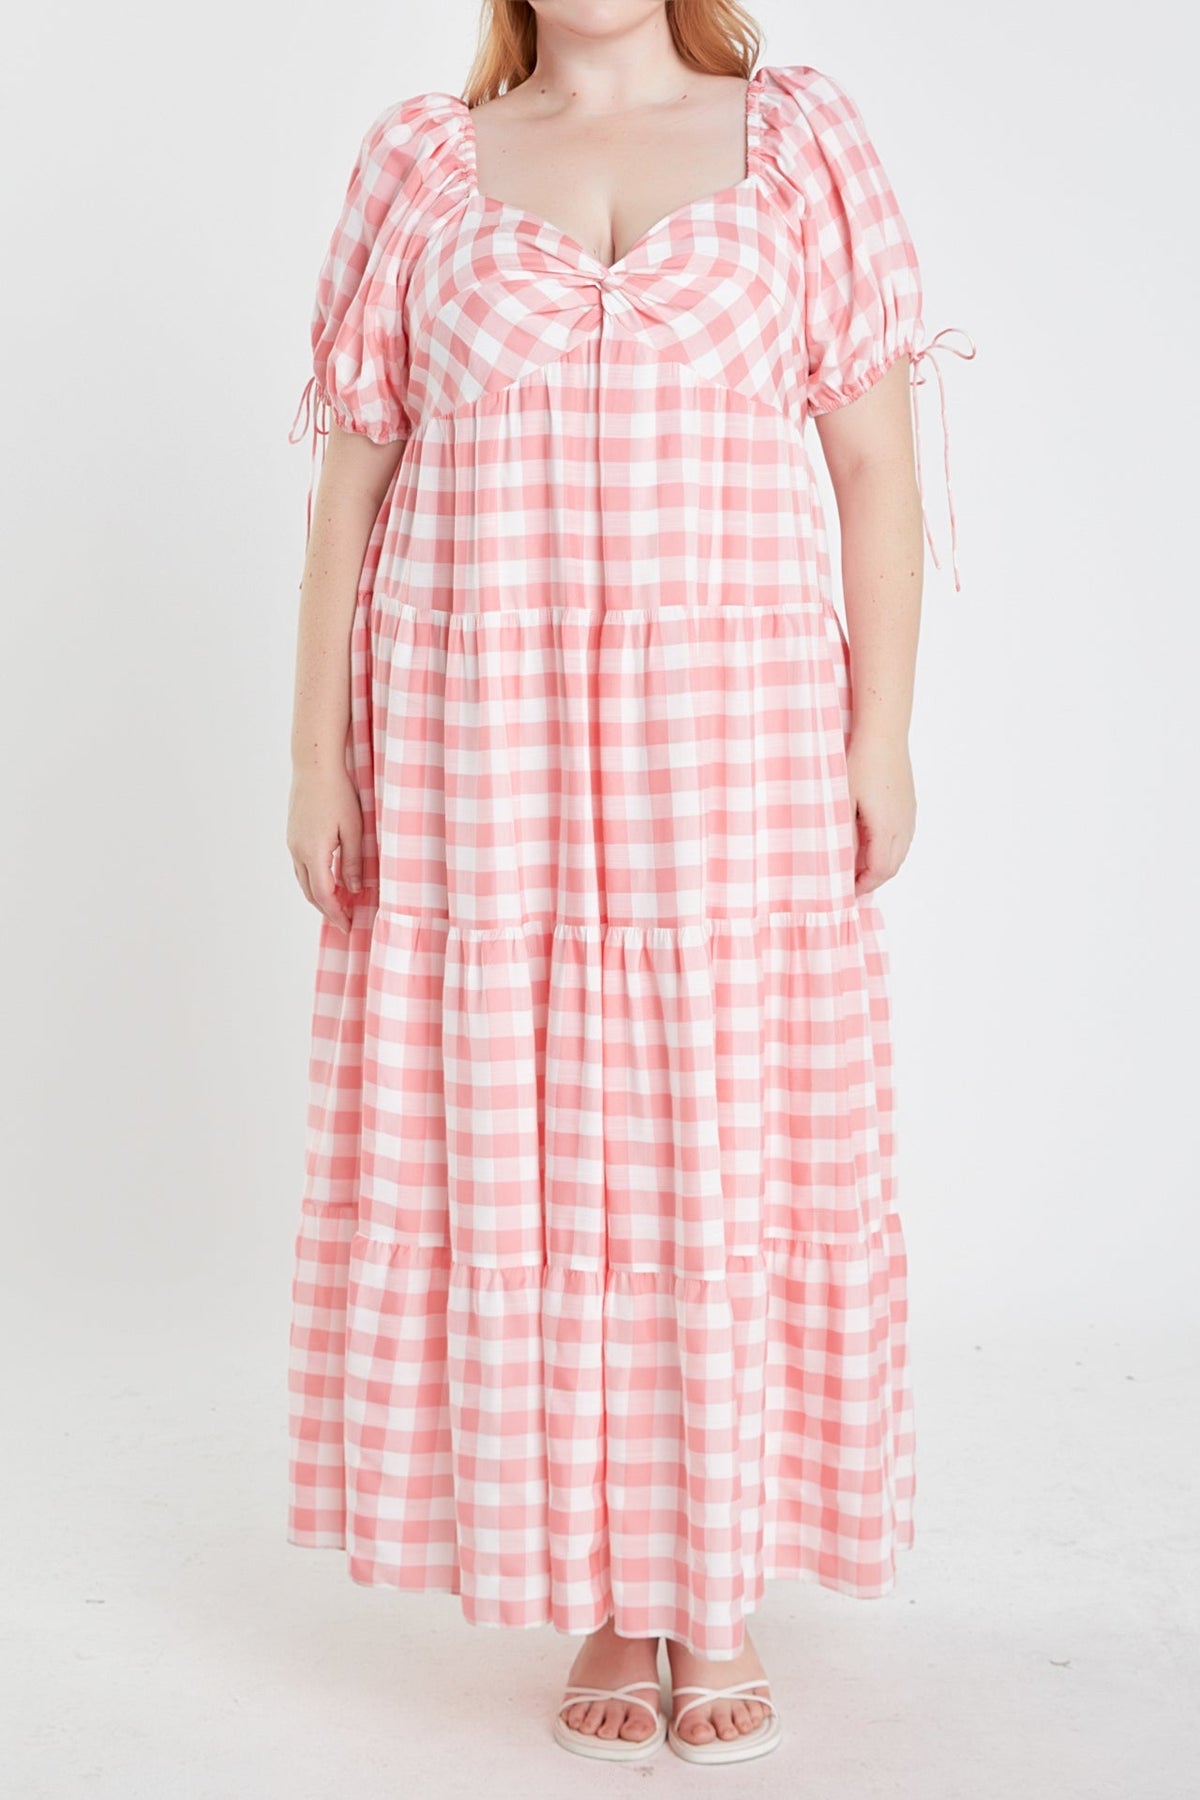 Knotted Gingham Dress